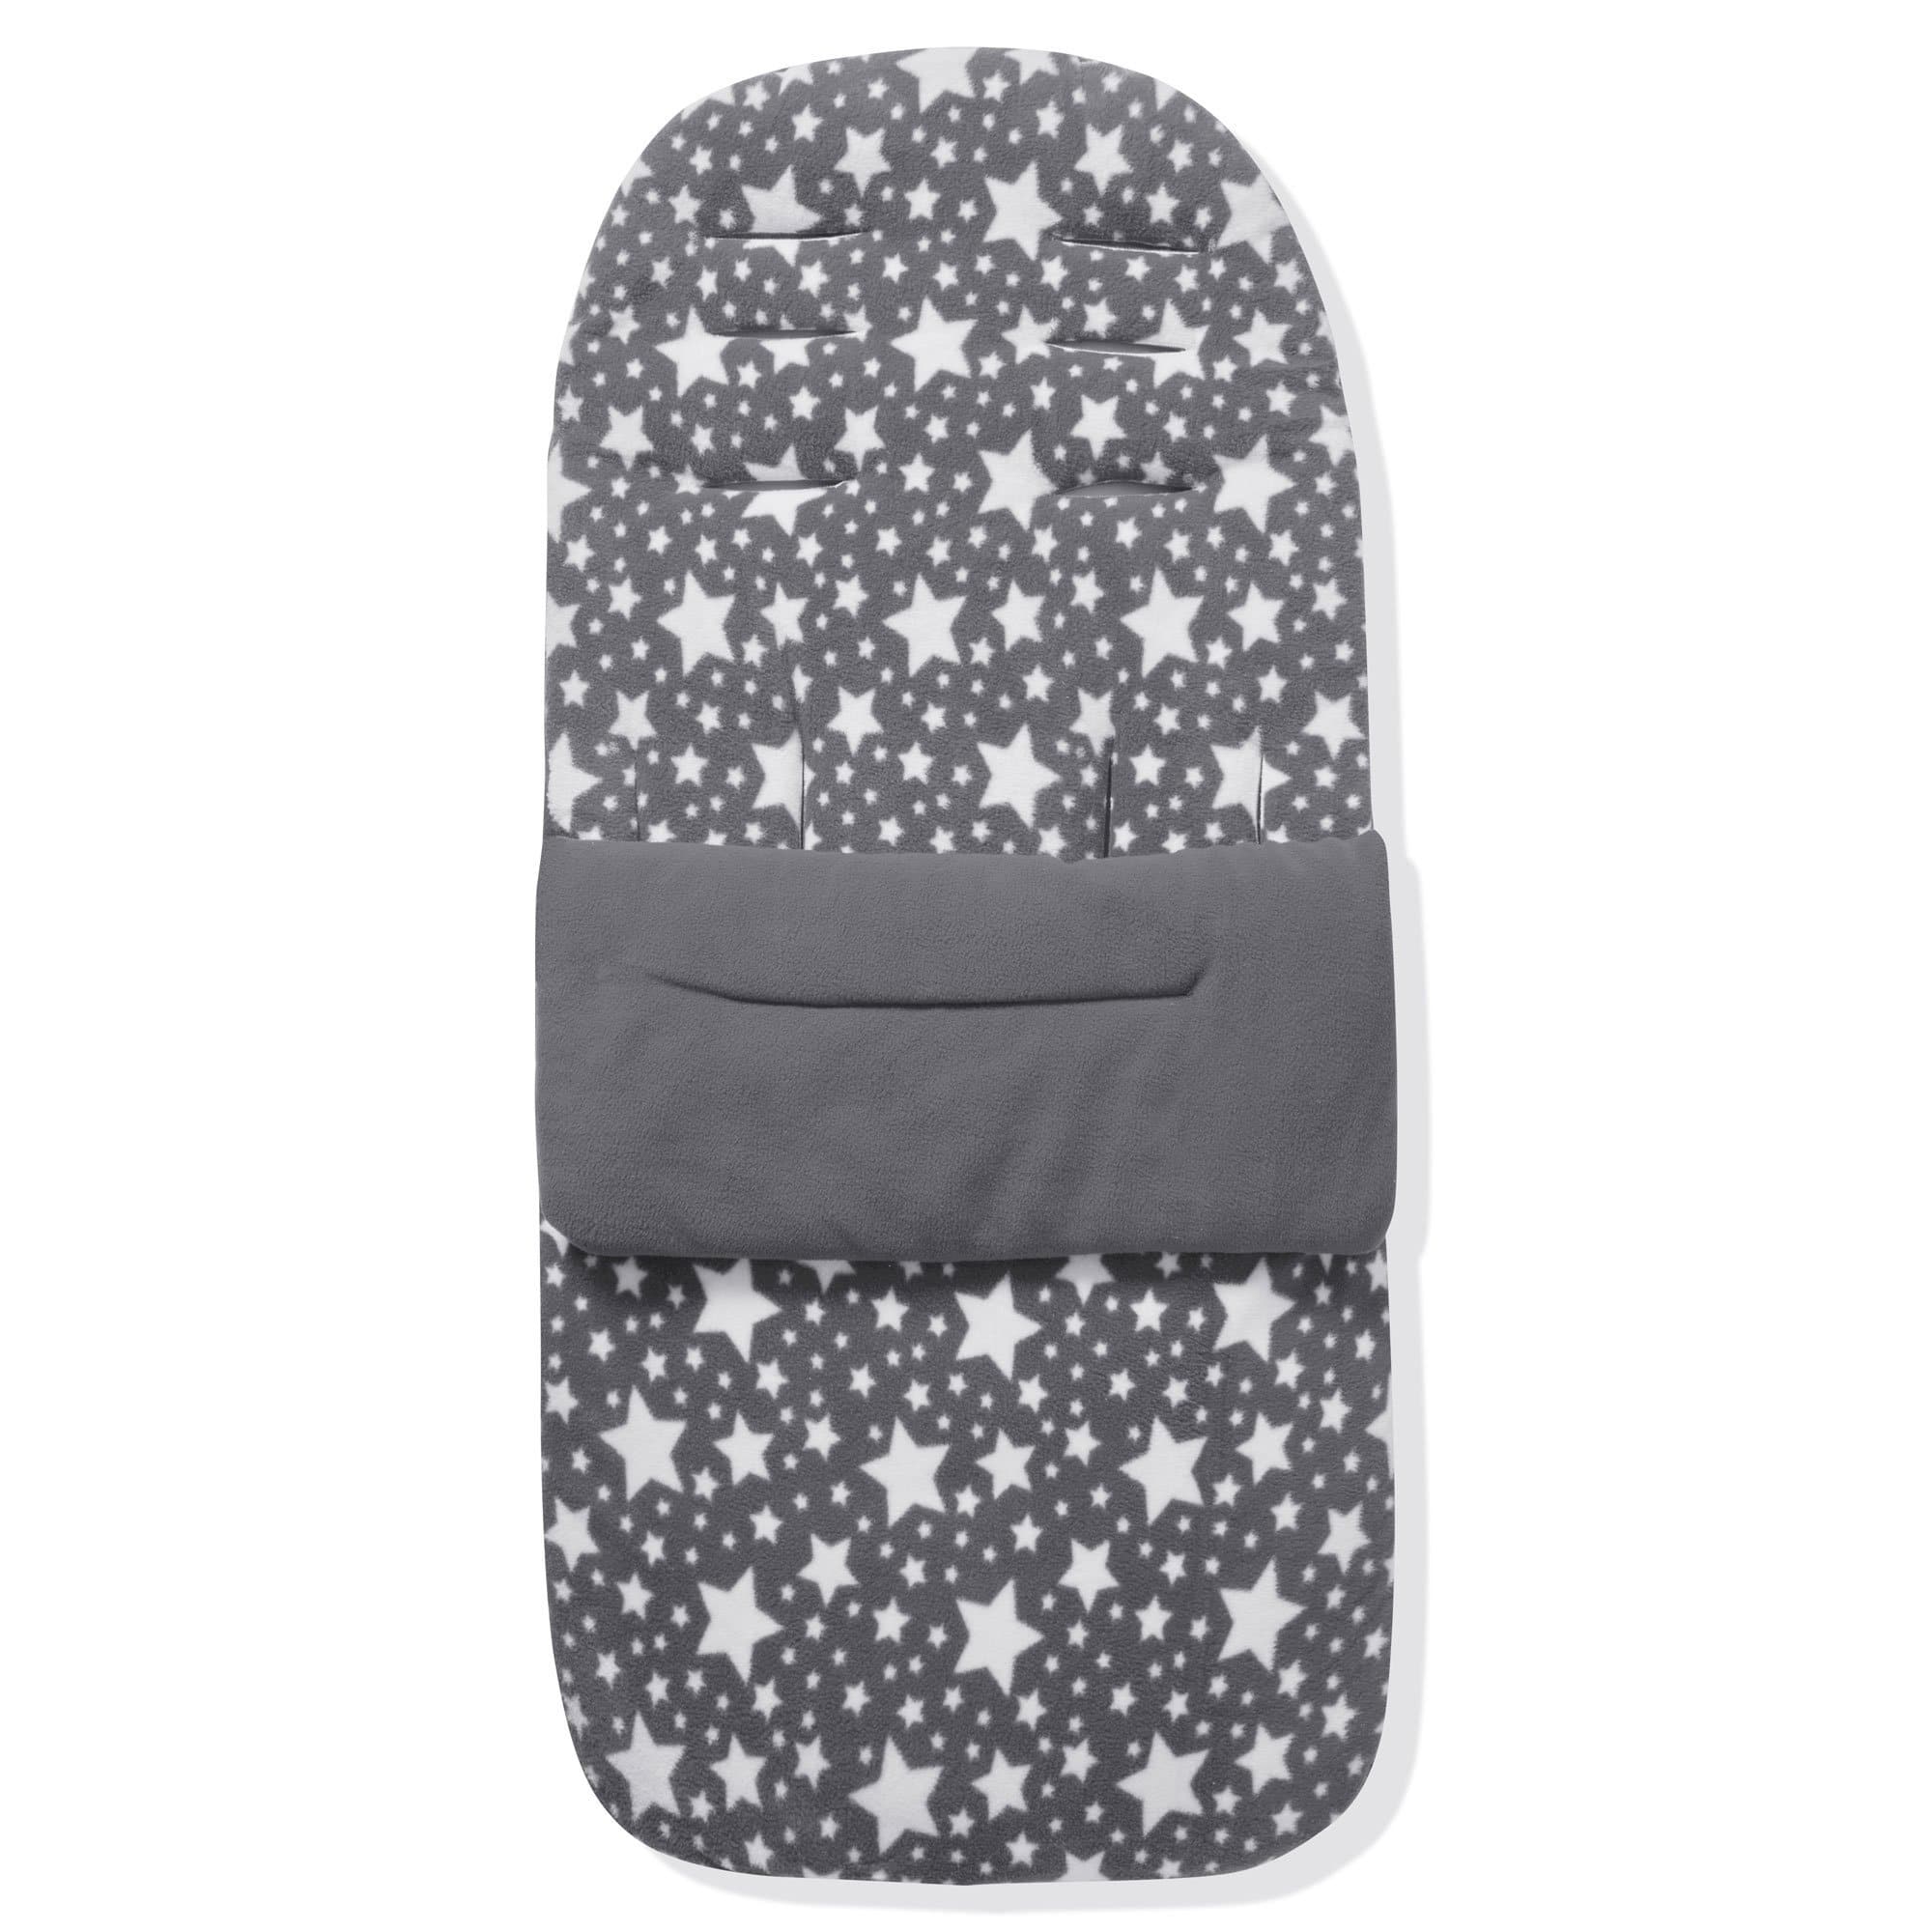 Fleece Footmuff / Cosy Toes Compatible with Esprit - Grey Star / Fits All Models | For Your Little One